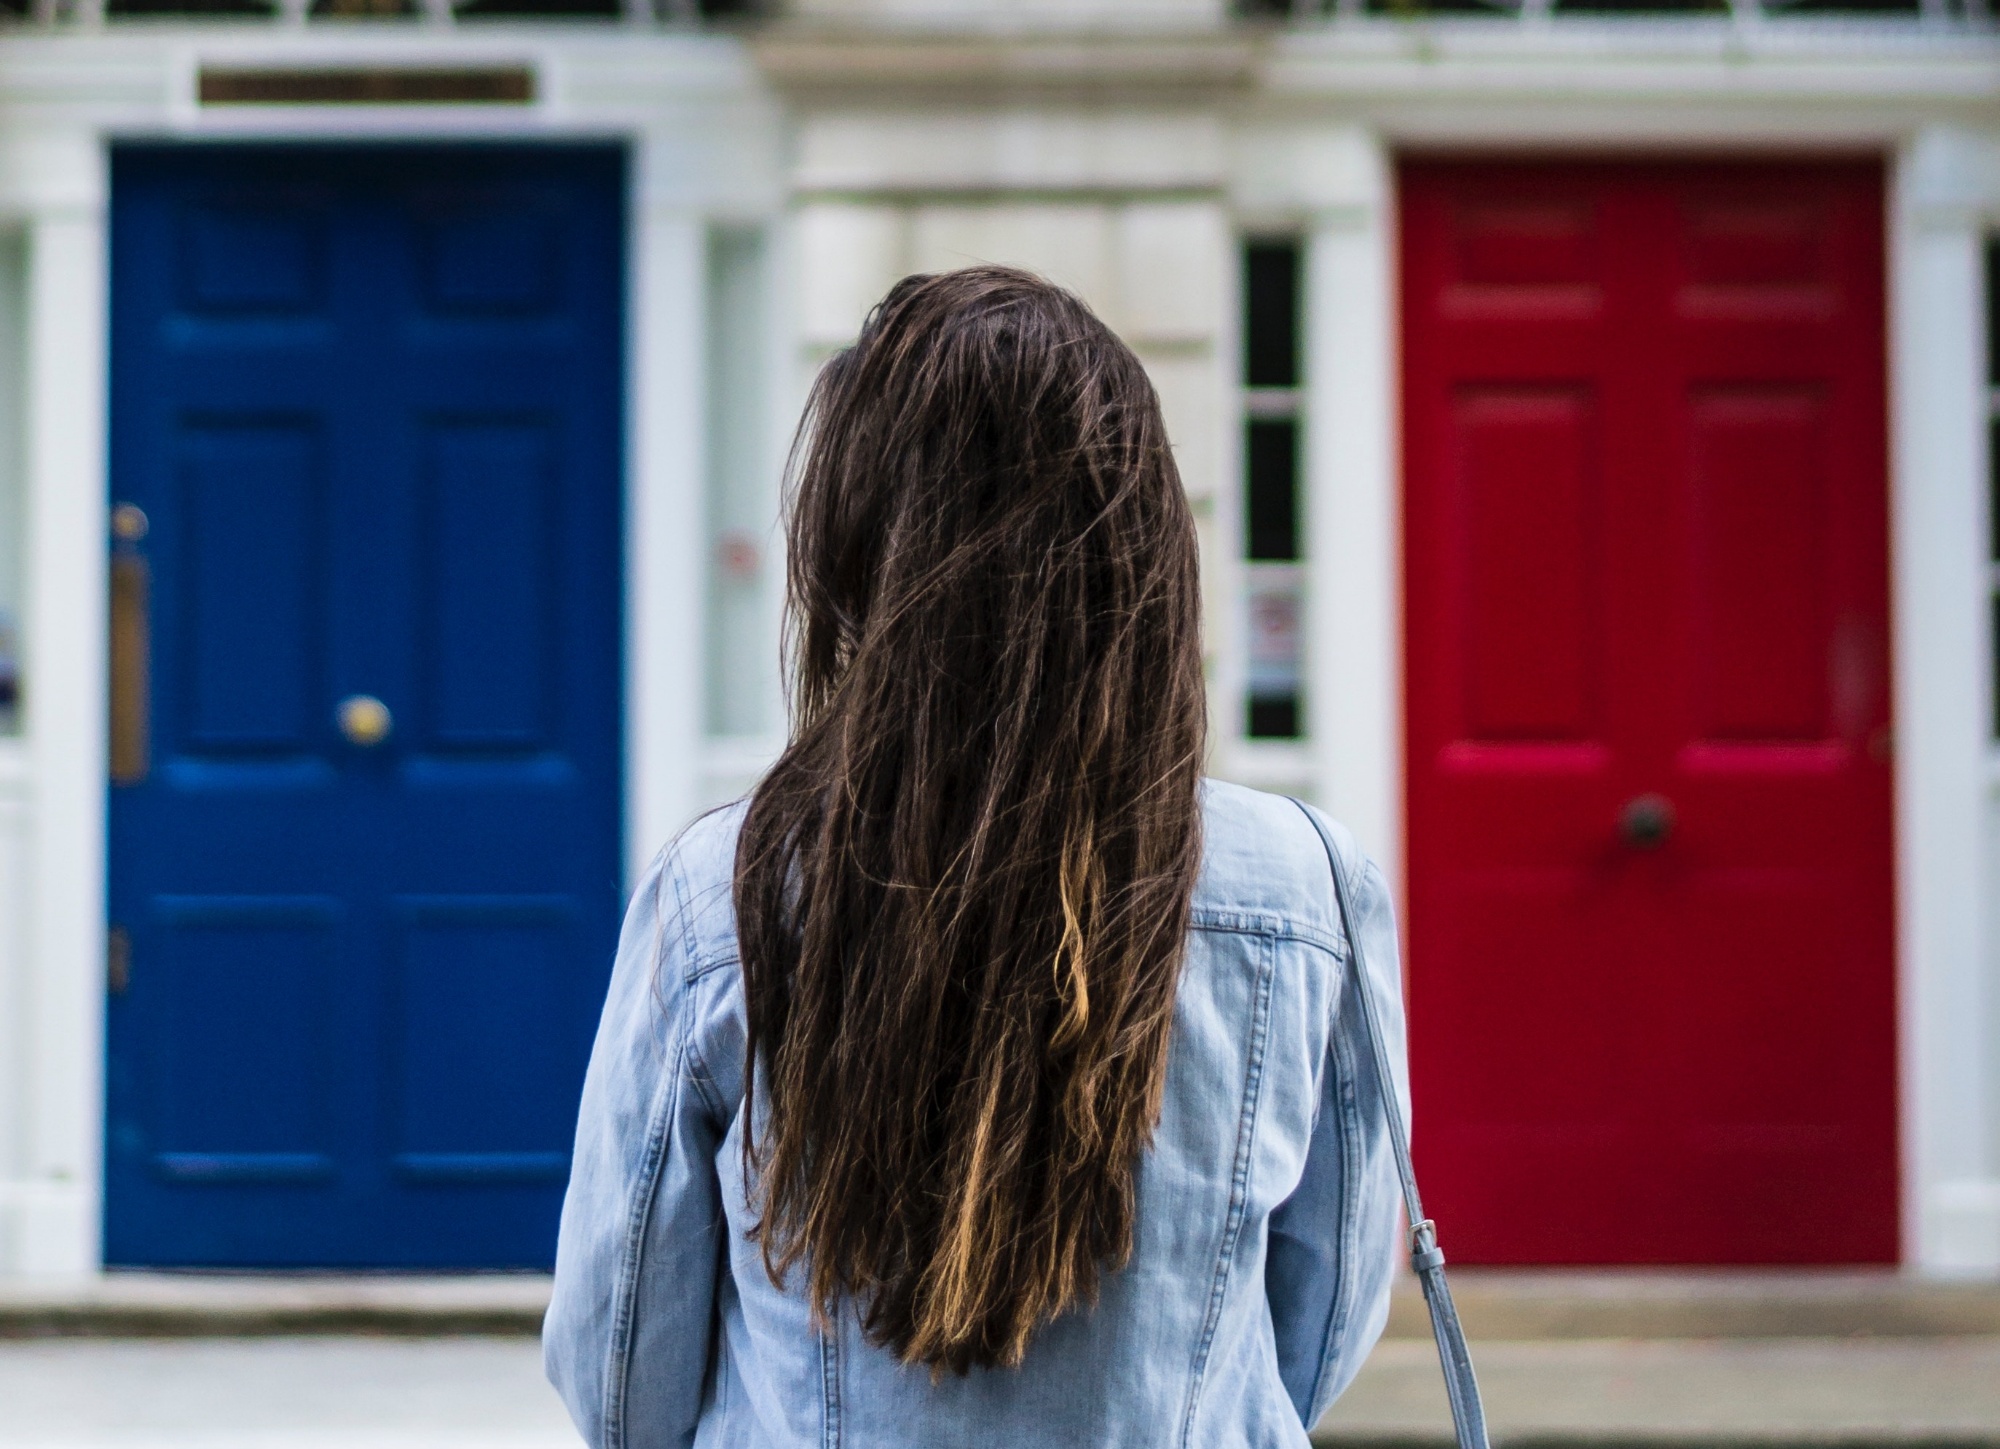 A young lady with brown hair faces a choice of two doors she can enter through.